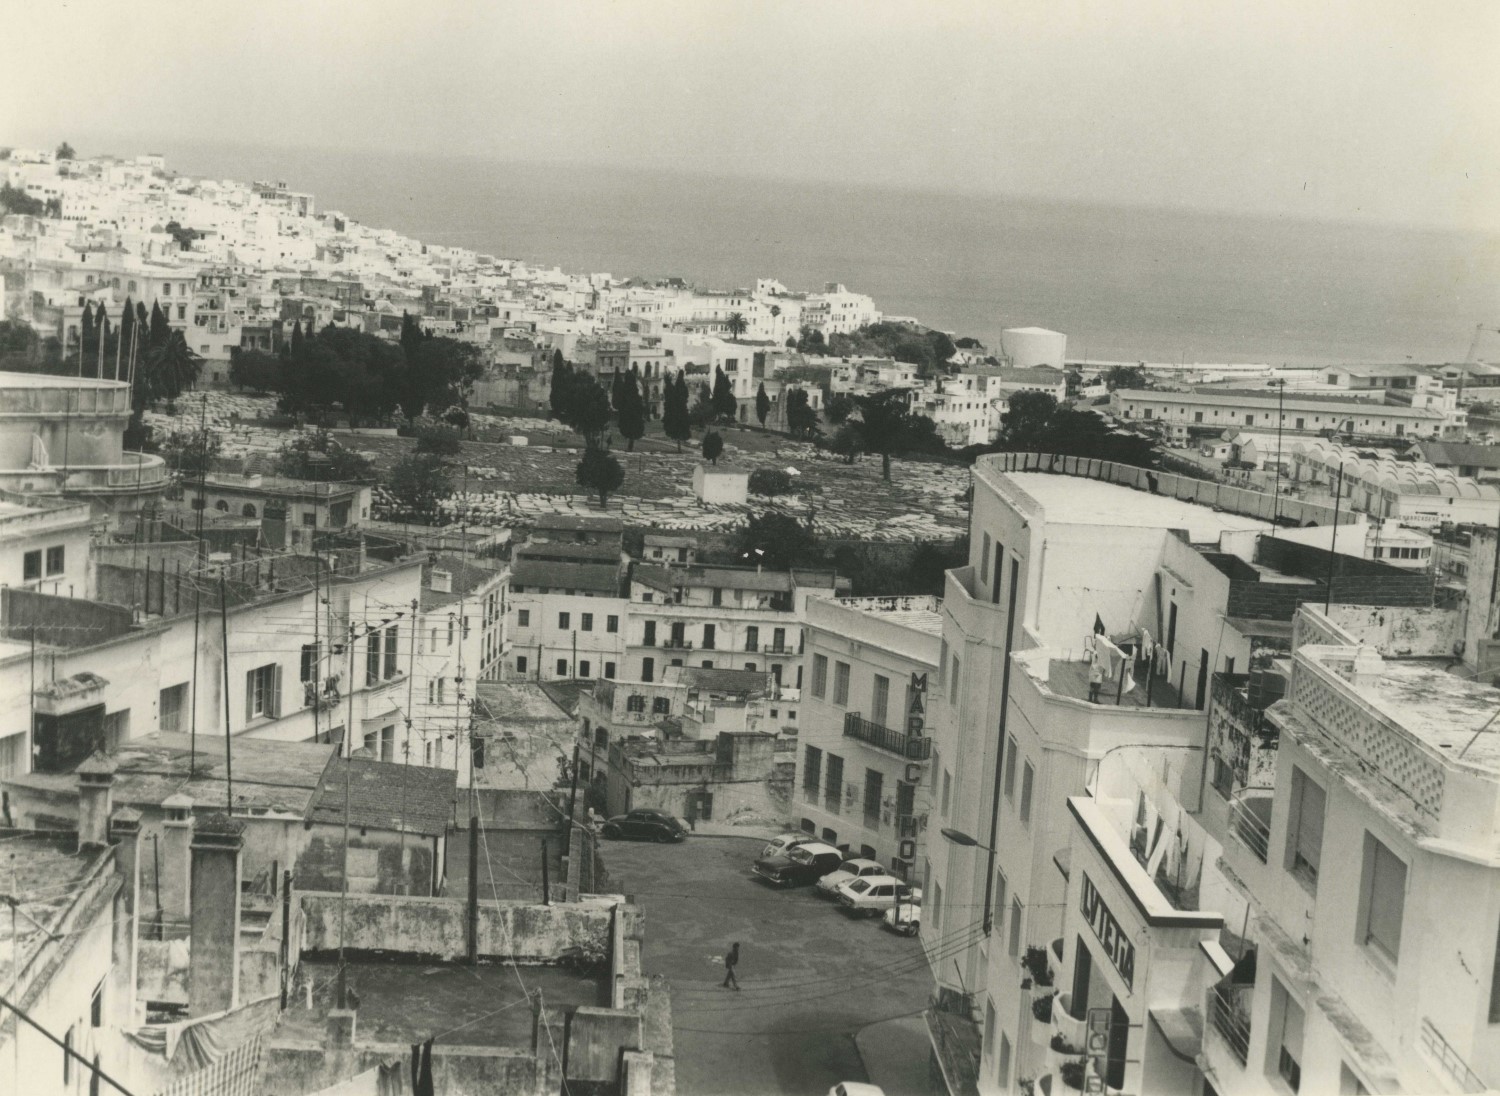 Jewish Cemetery of Tangier - General view from the off Boulevard Pasteur toward the Jewish cemetery and medina